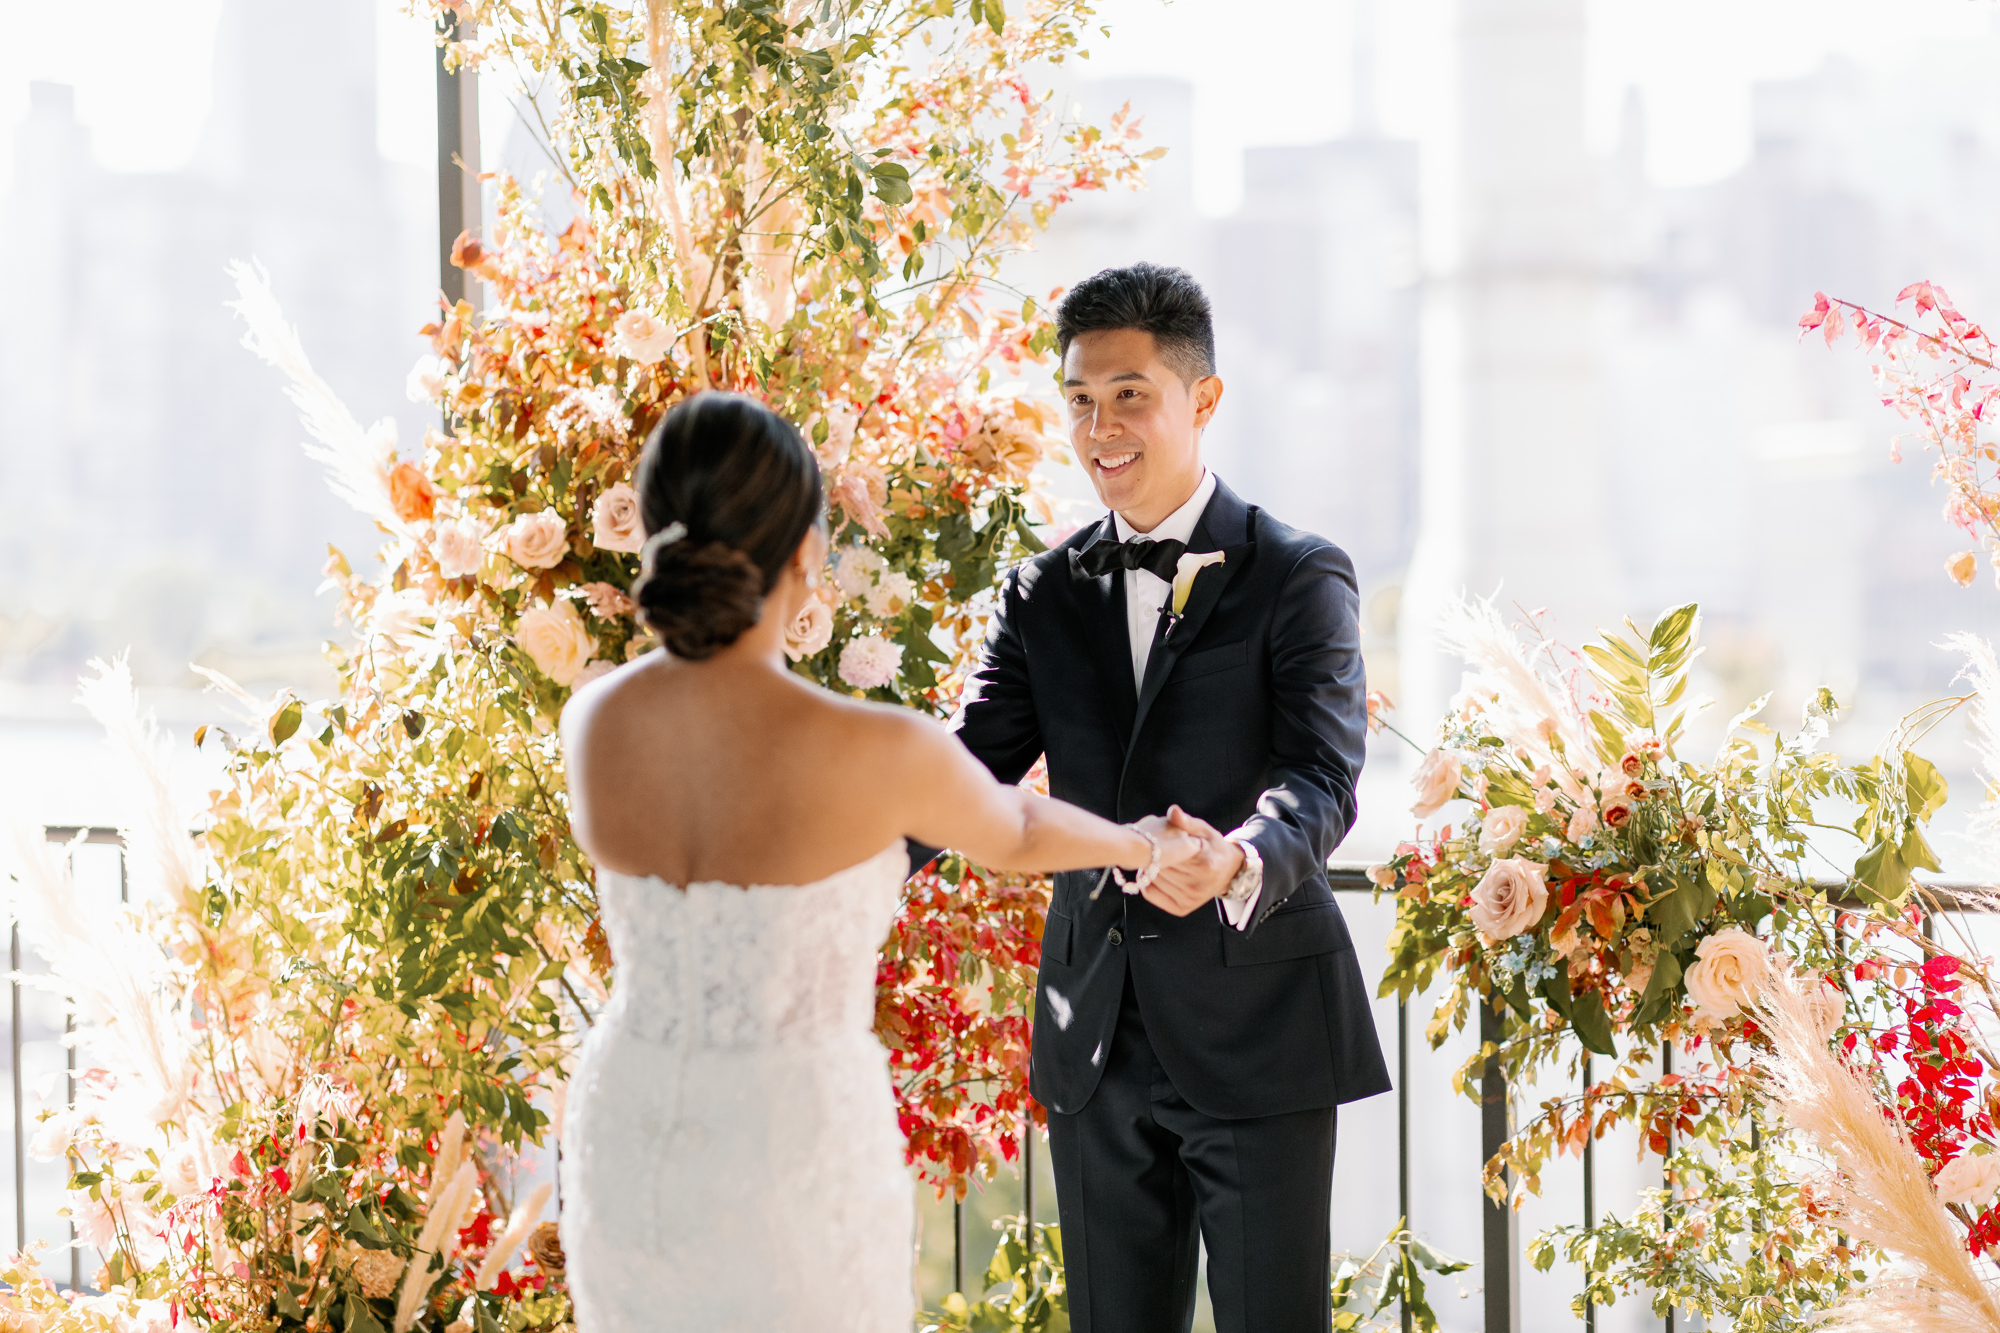 Ravel Hotel wedding in NYC with floral arch